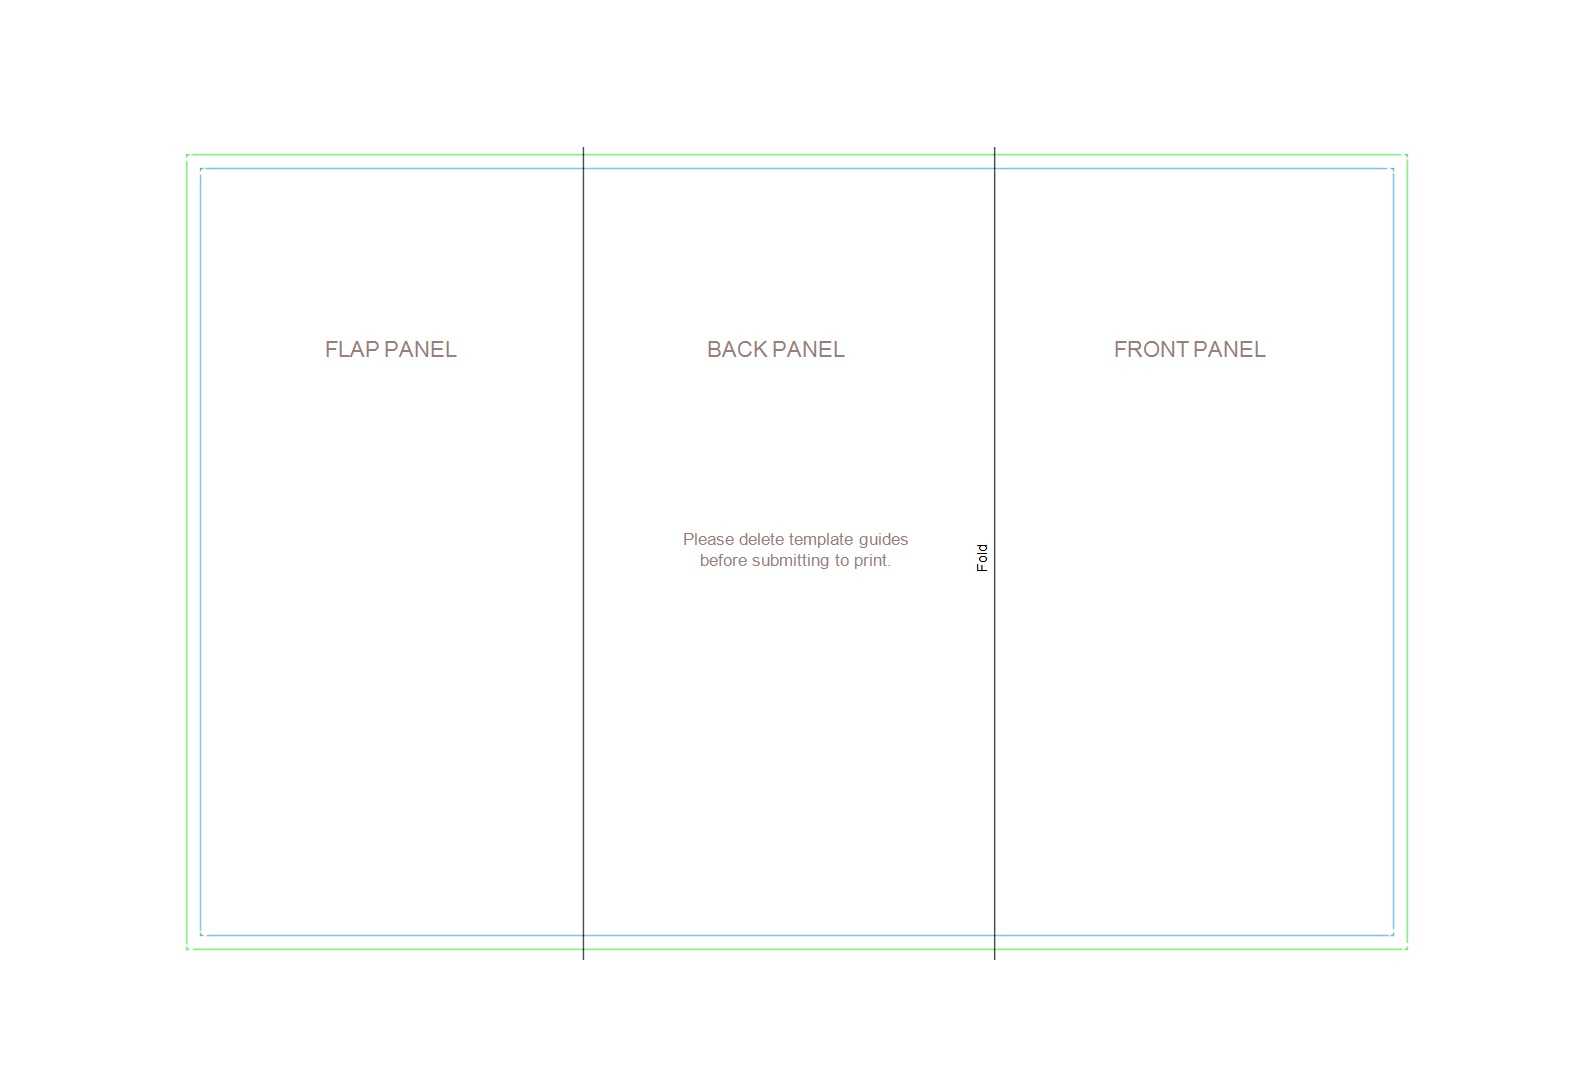 50 Free Pamphlet Templates [Word / Google Docs] ᐅ Template Lab With Regard To Google Docs Tri Fold Brochure Template